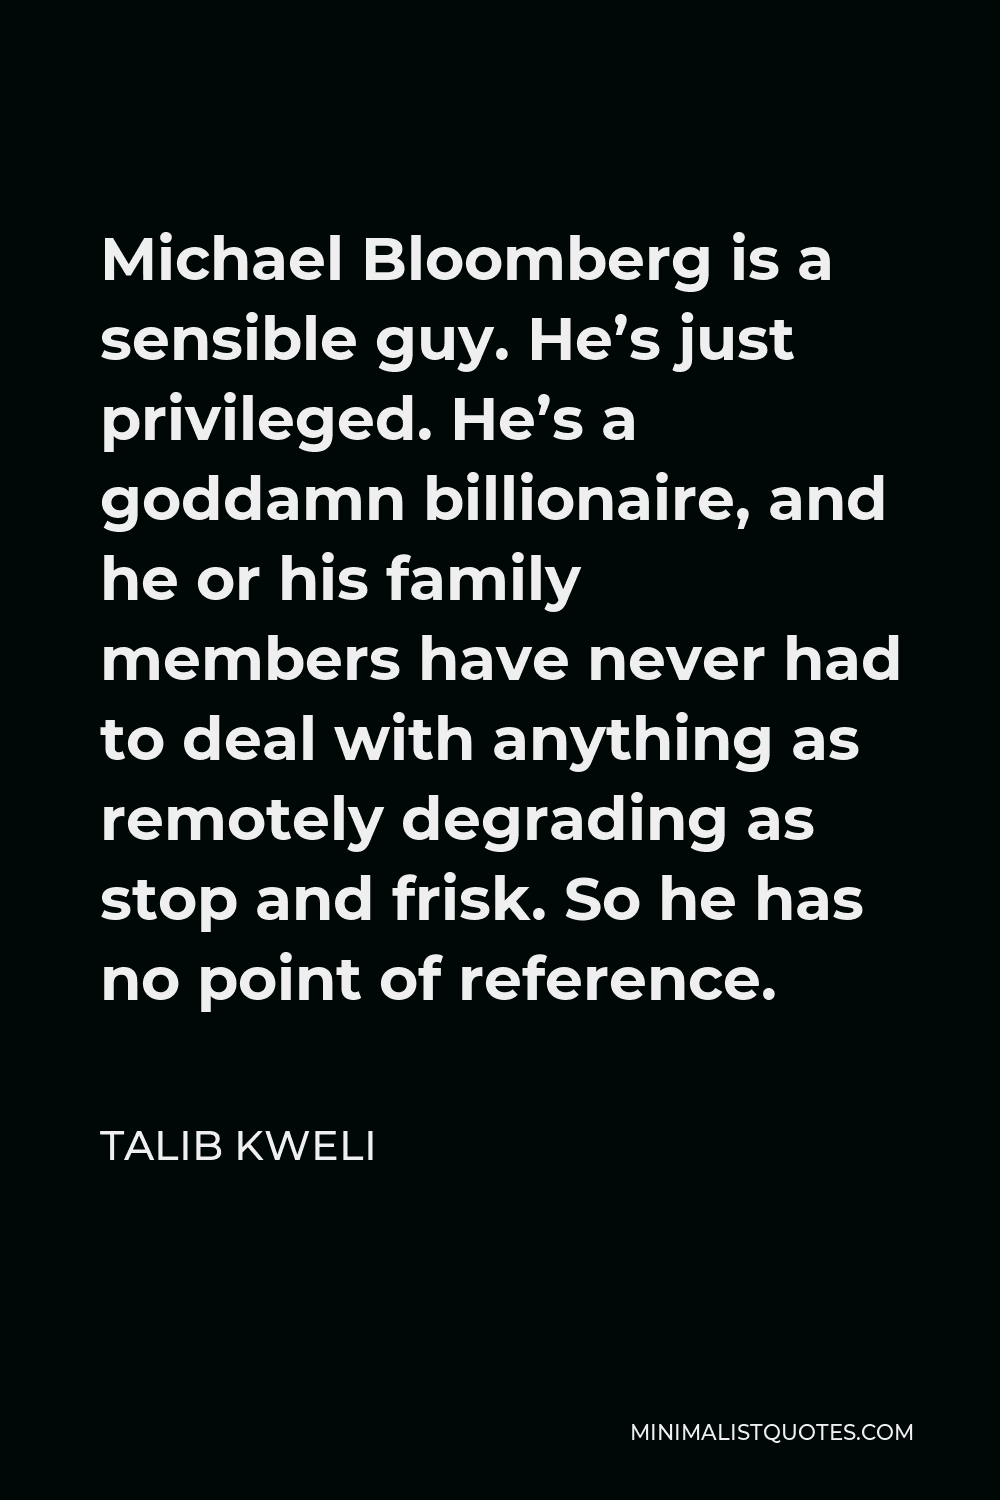 Talib Kweli Quote - Michael Bloomberg is a sensible guy. He’s just privileged. He’s a goddamn billionaire, and he or his family members have never had to deal with anything as remotely degrading as stop and frisk. So he has no point of reference.